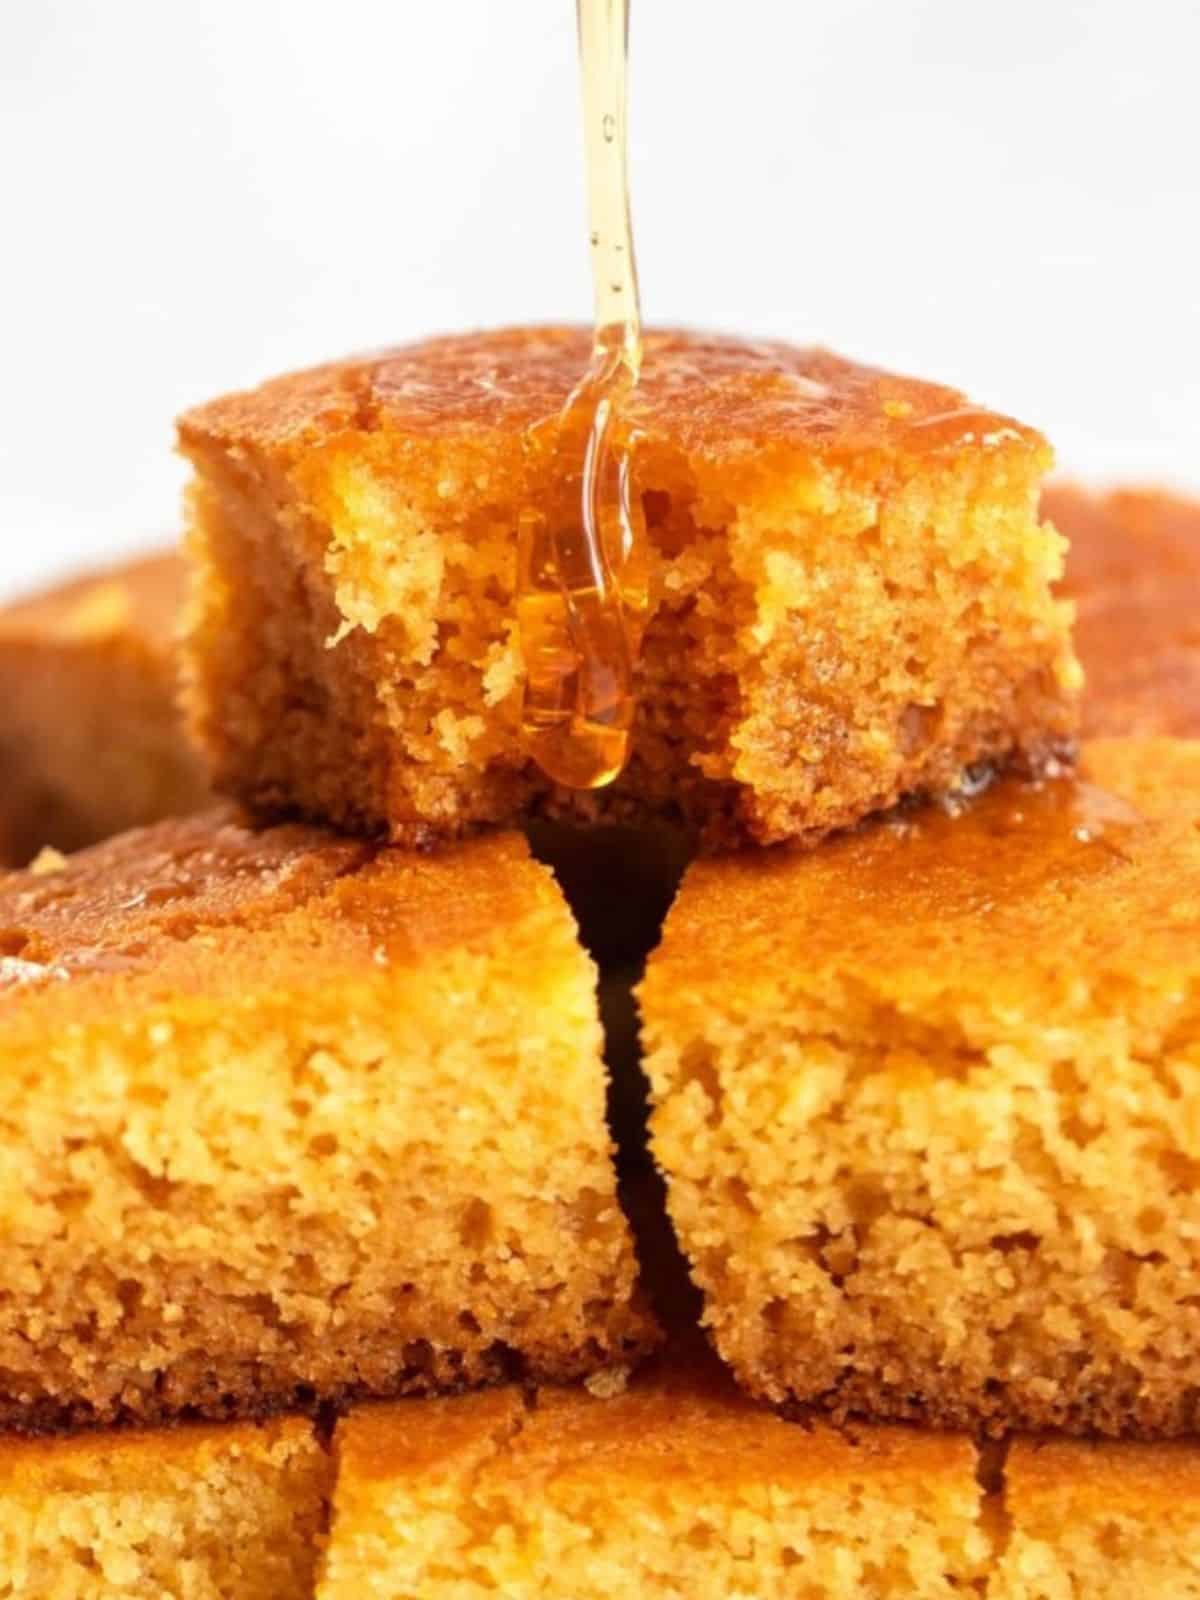 golden brown buttermilk cornbread drizzled with syrup.